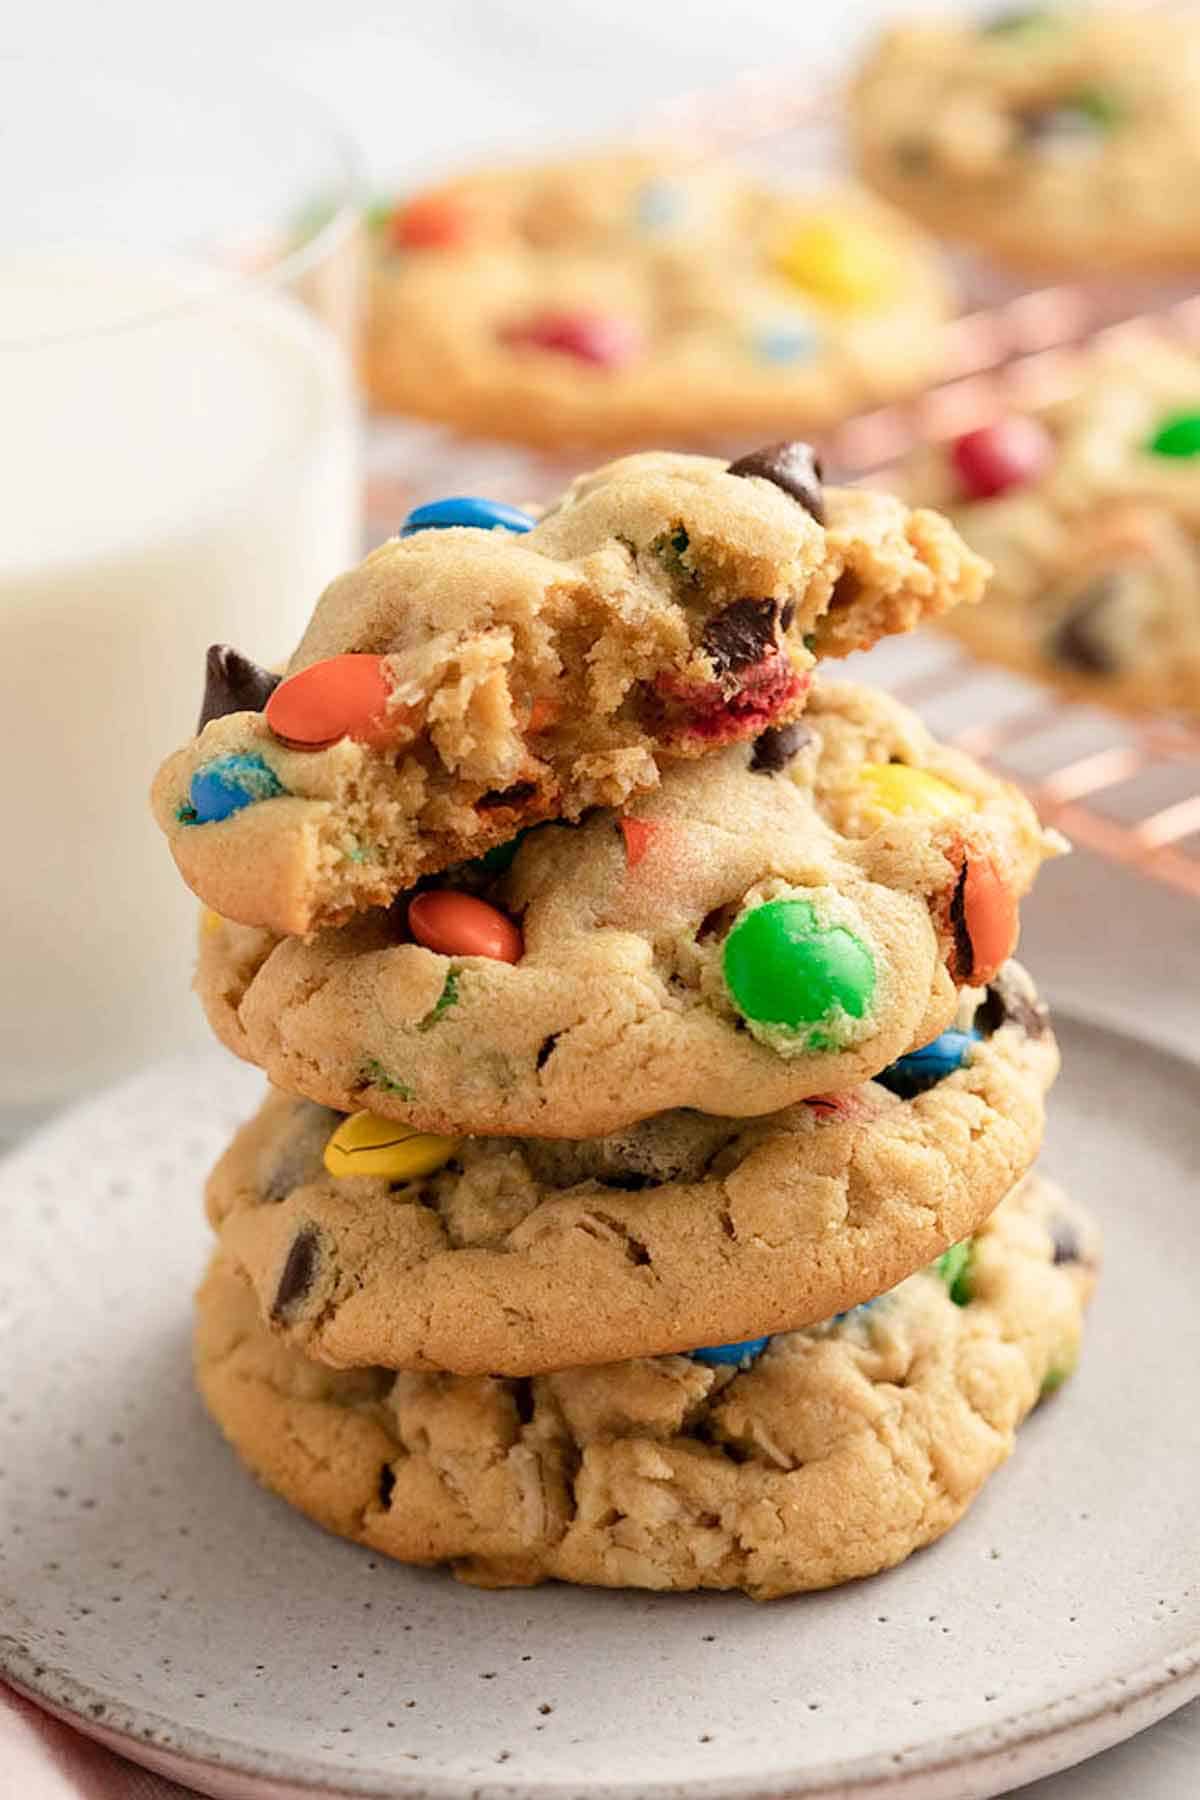 A stack of three and a half monster cookies on a plate. Glass of milk in the background and more cookies.